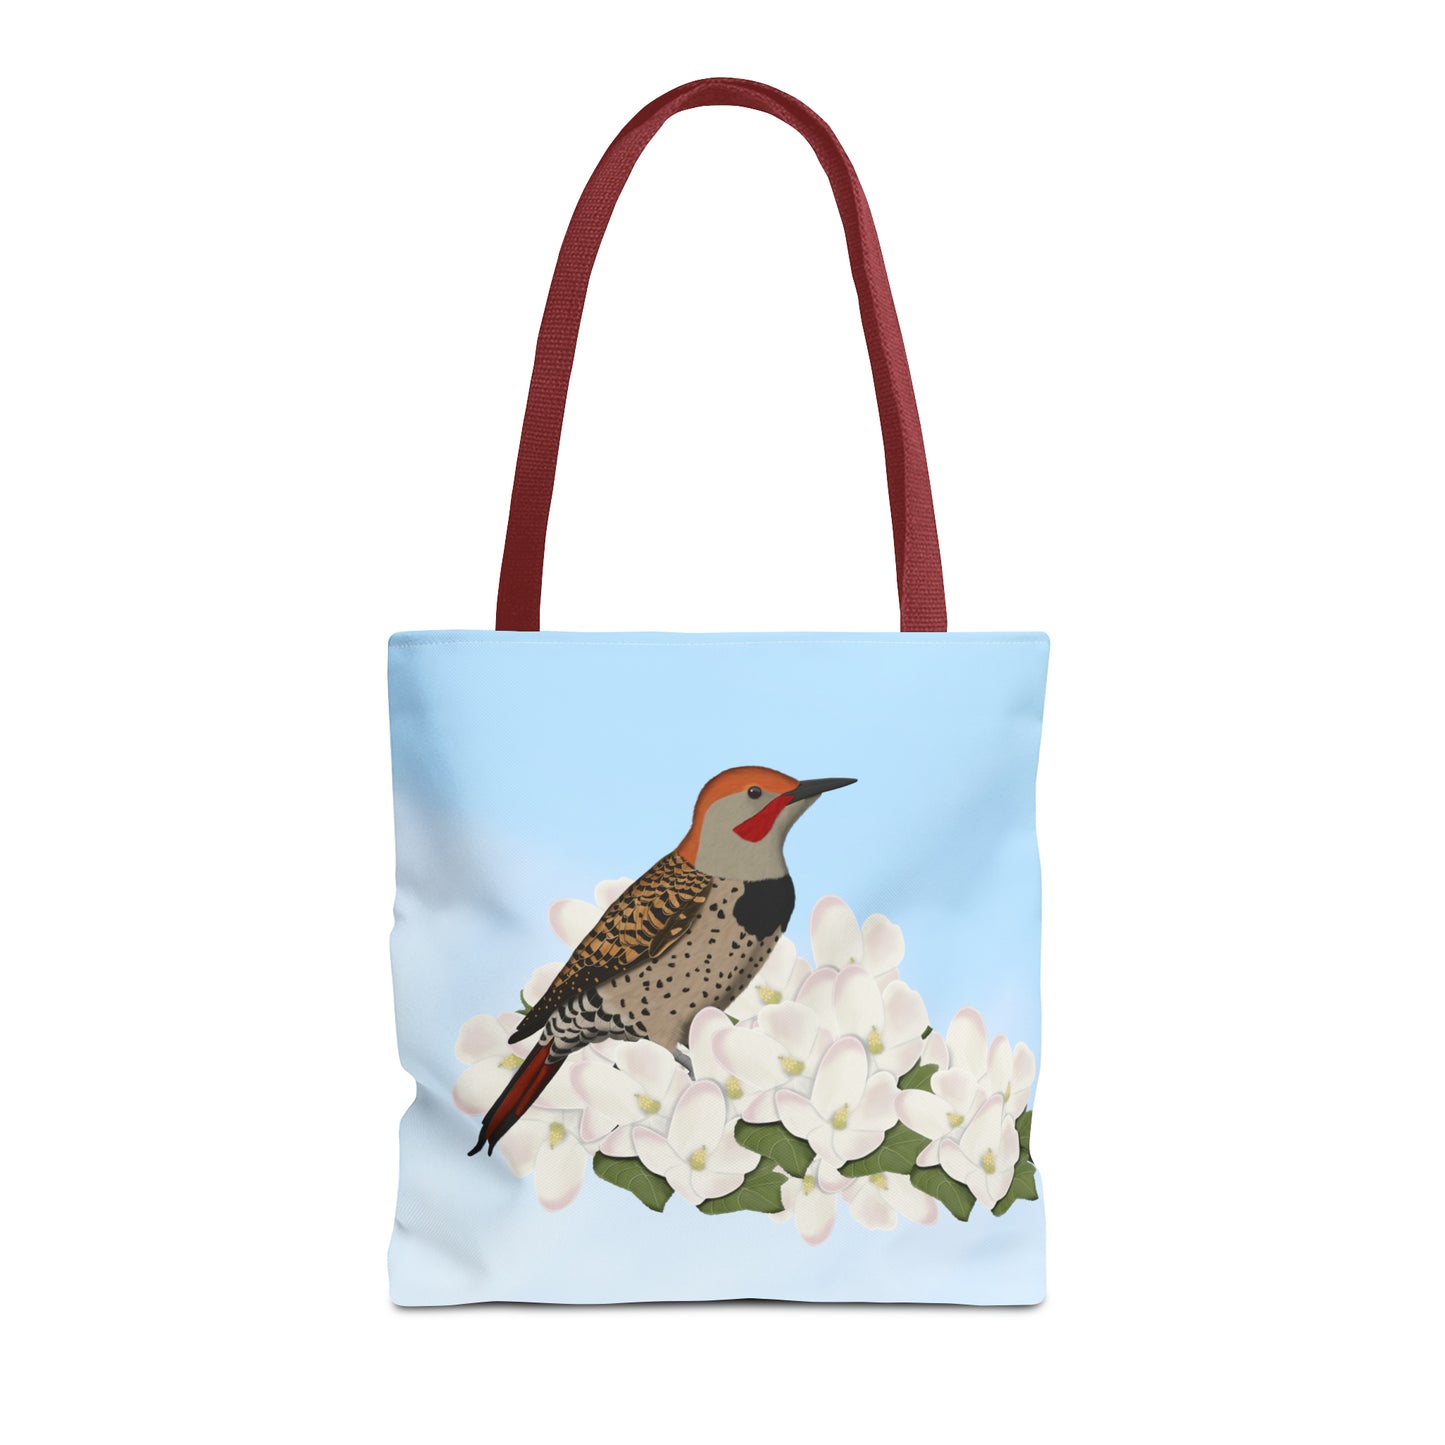 Northern Flicker in Spring Blossoms Bird Tote Bag 16"x16"